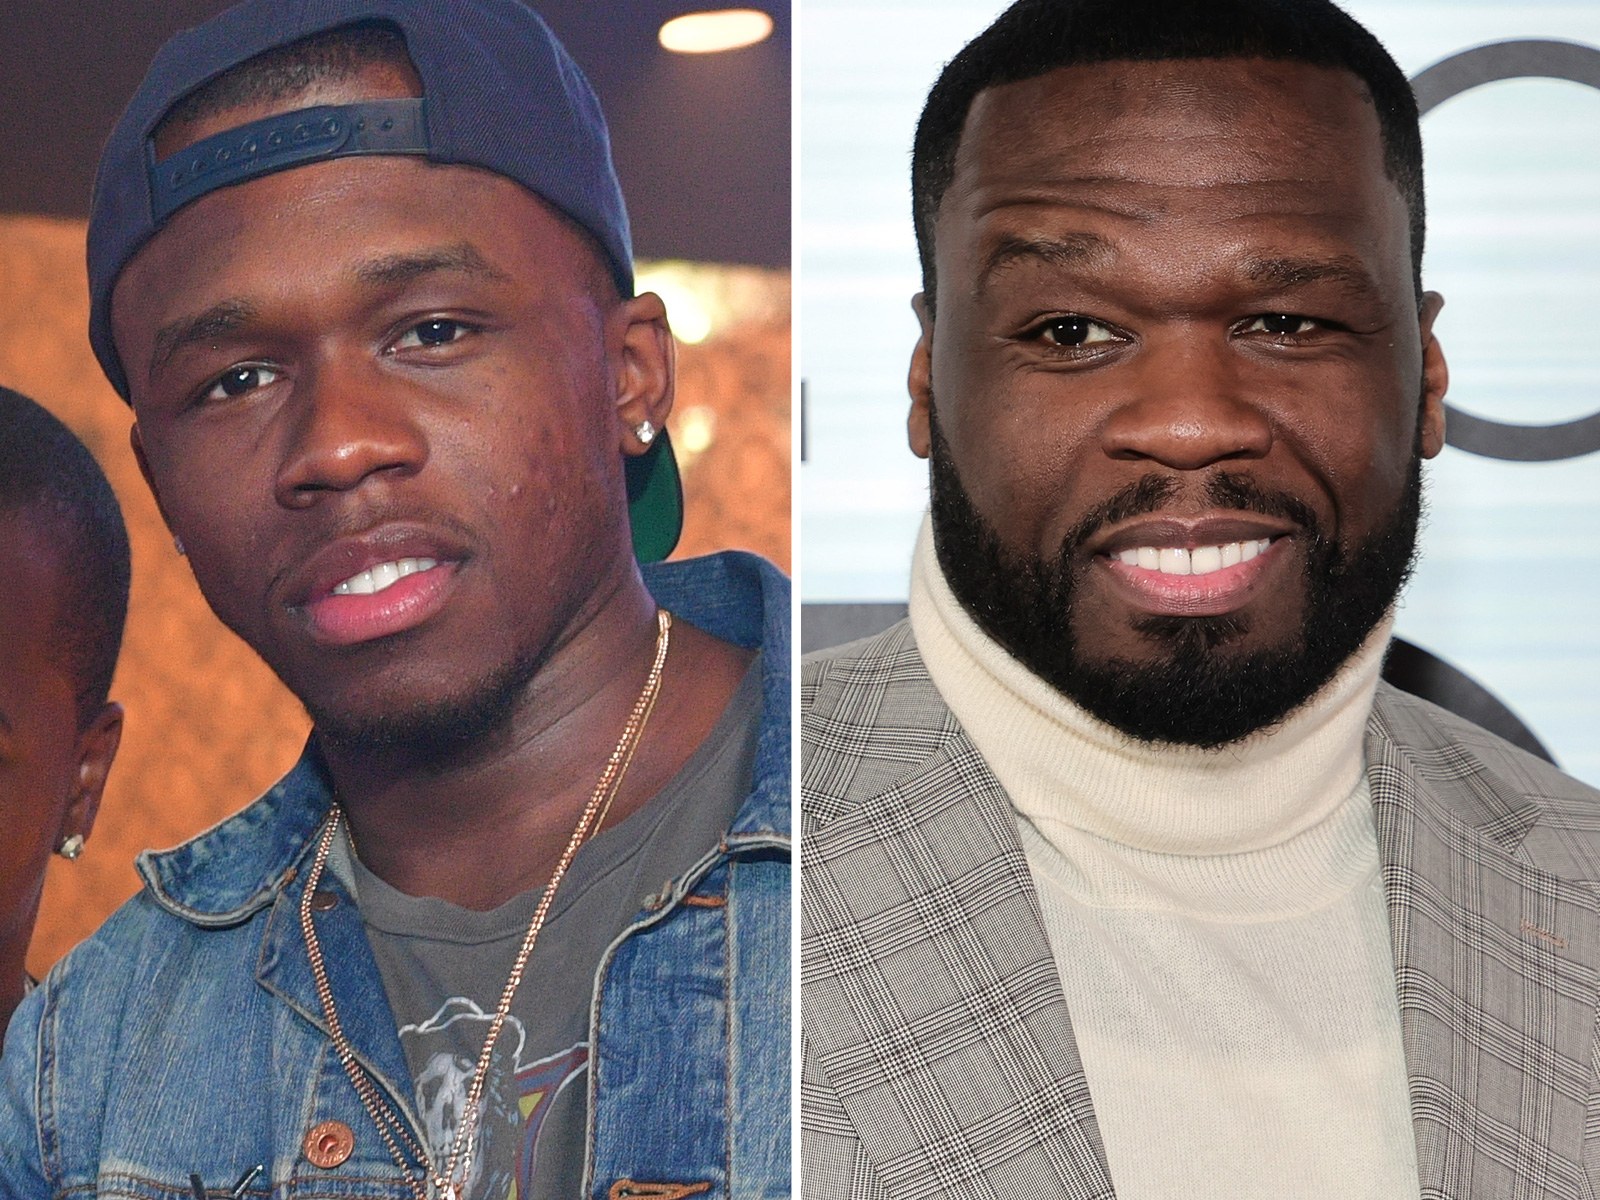 Marquise and his father 50 Cent